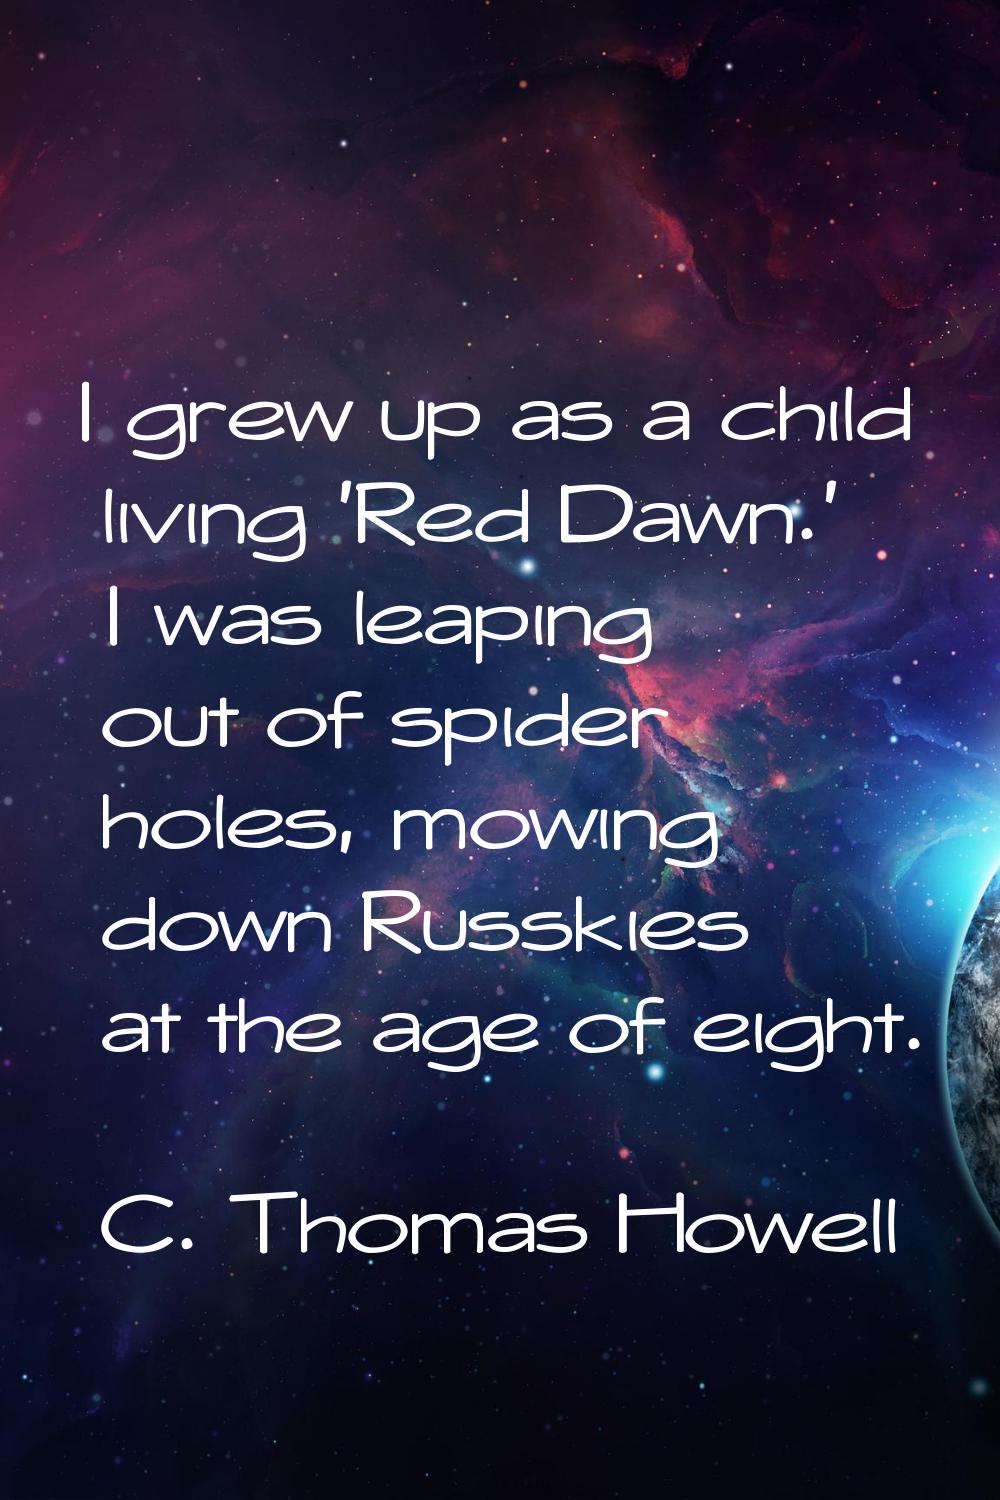 I grew up as a child living 'Red Dawn.' I was leaping out of spider holes, mowing down Russkies at 